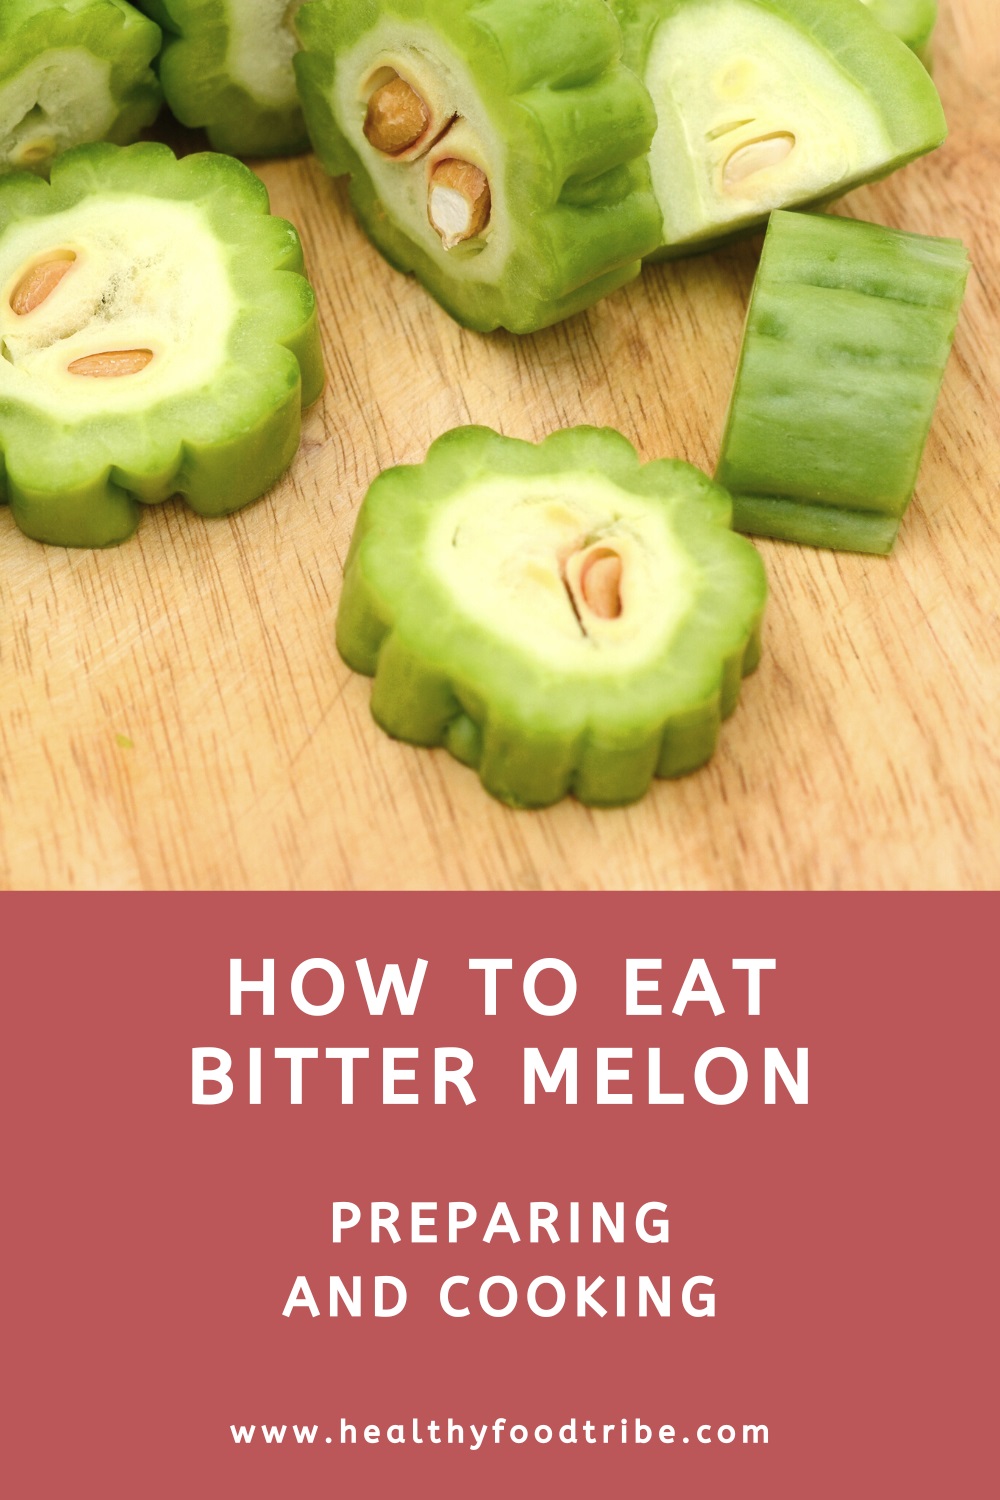 How to prepare, cook and eat bitter melon